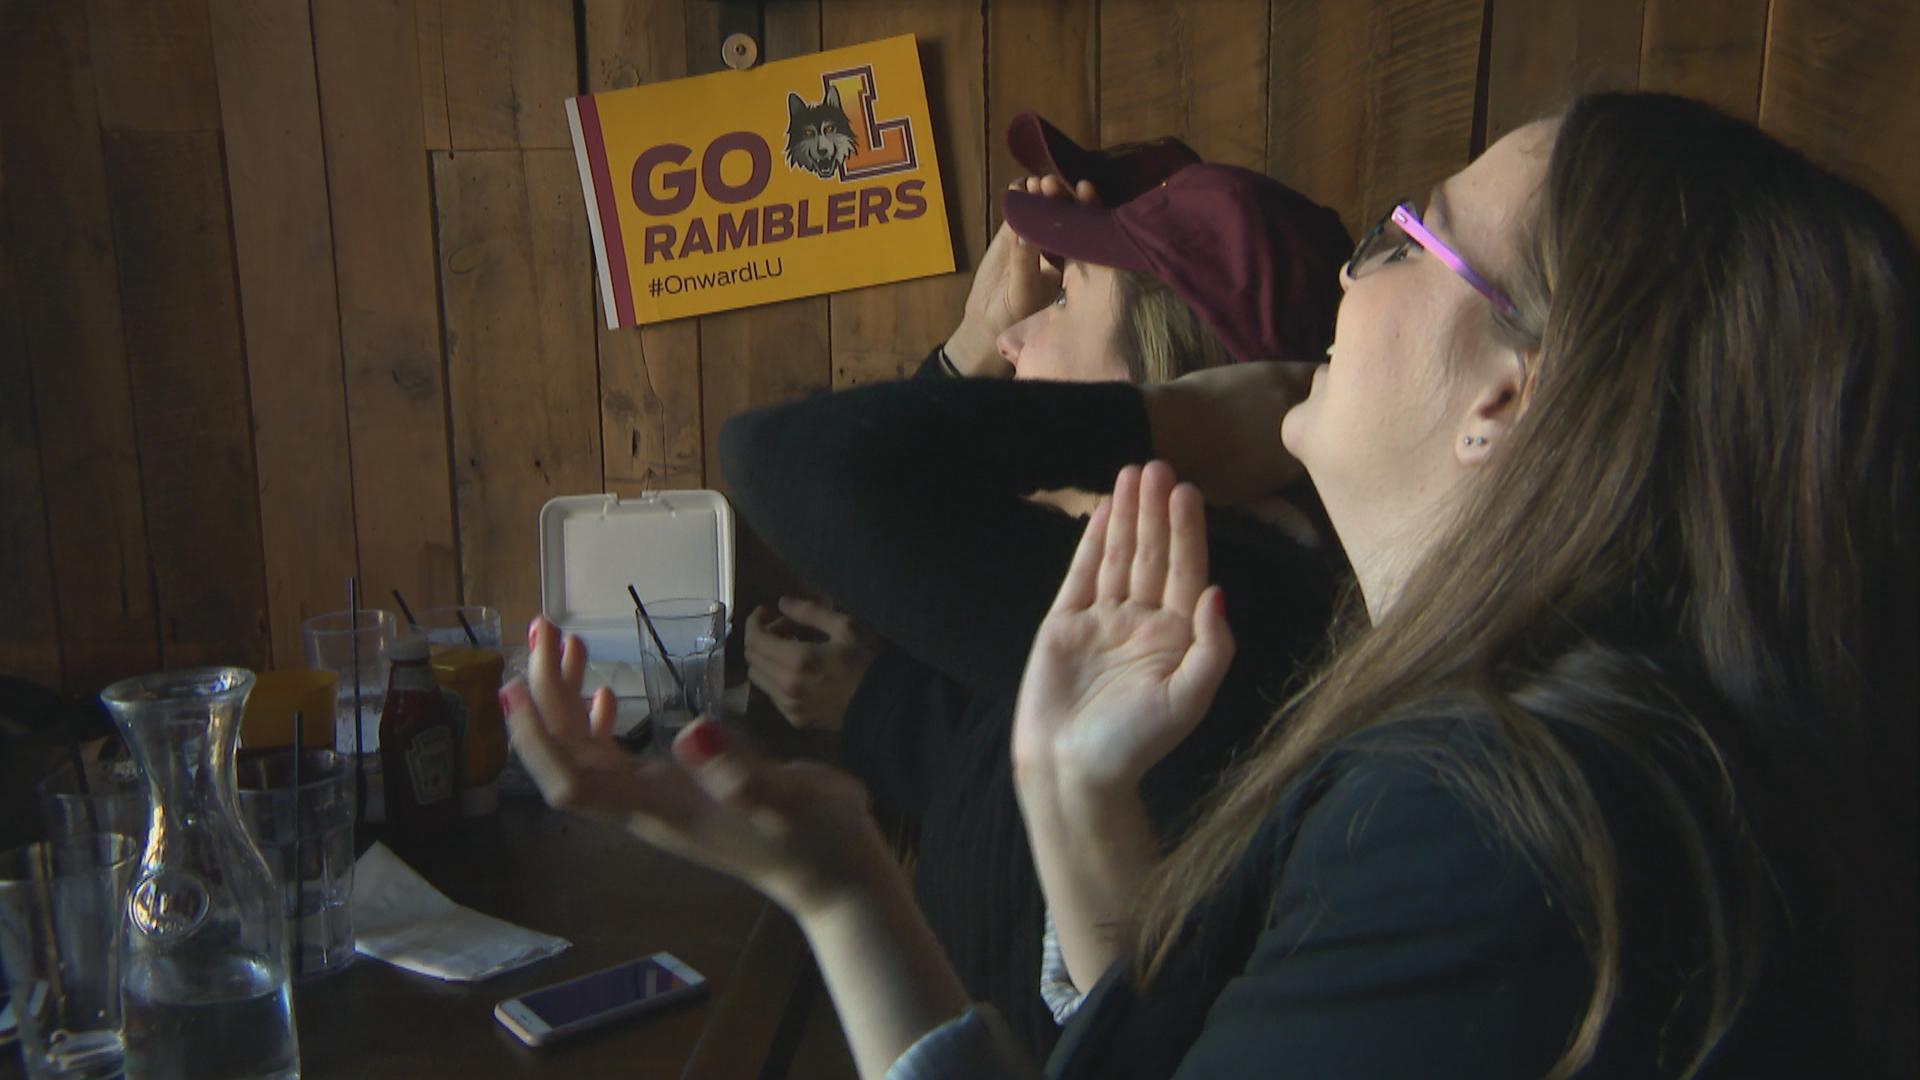 Loyola Ramblers fans cheer on the team at in Rogers Park bar Bruno’s on Thursday, March 15, 2018.